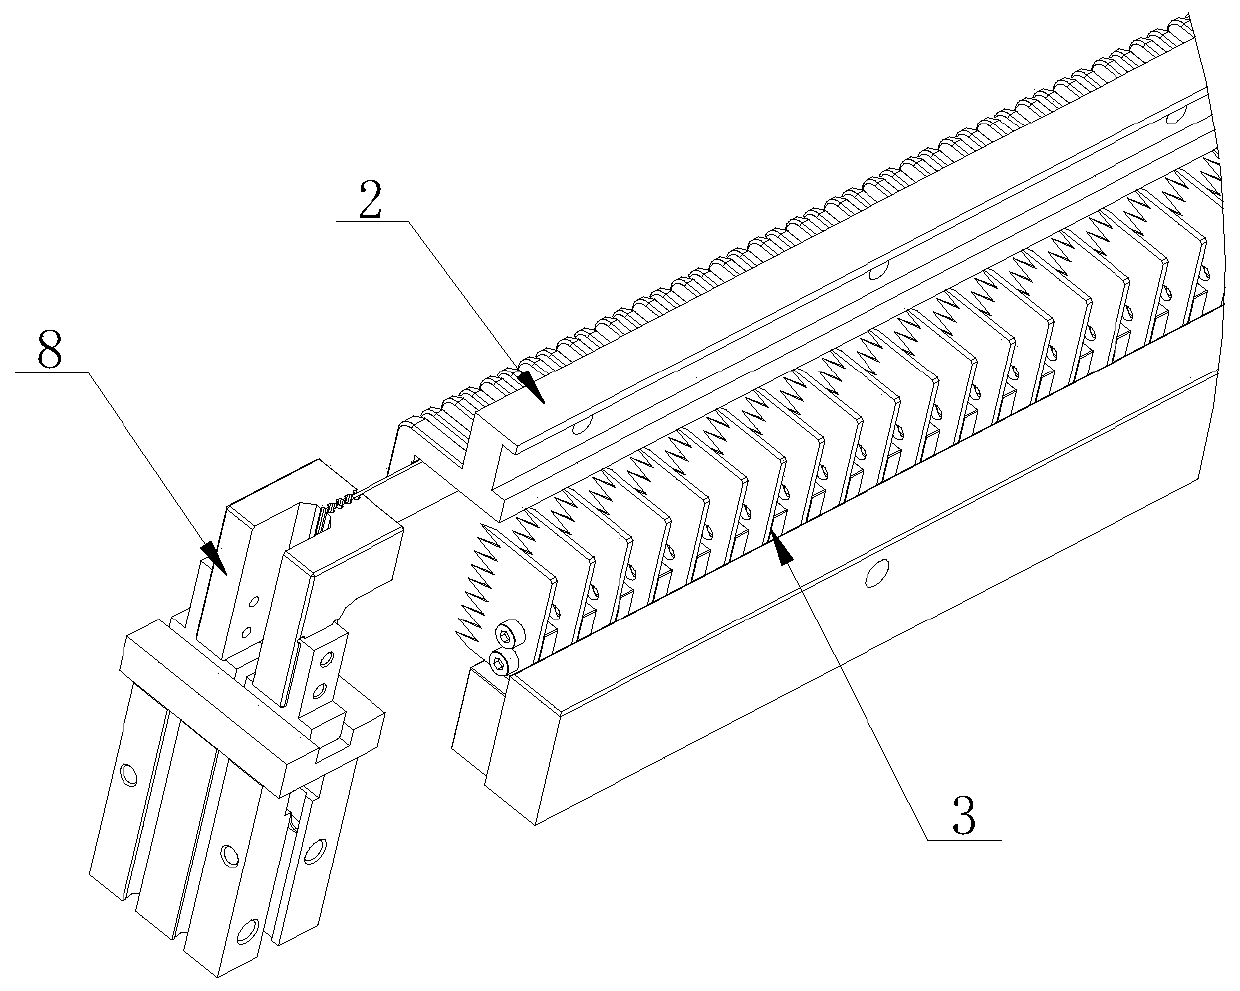 Process for sticking adhesive tape on wire rods